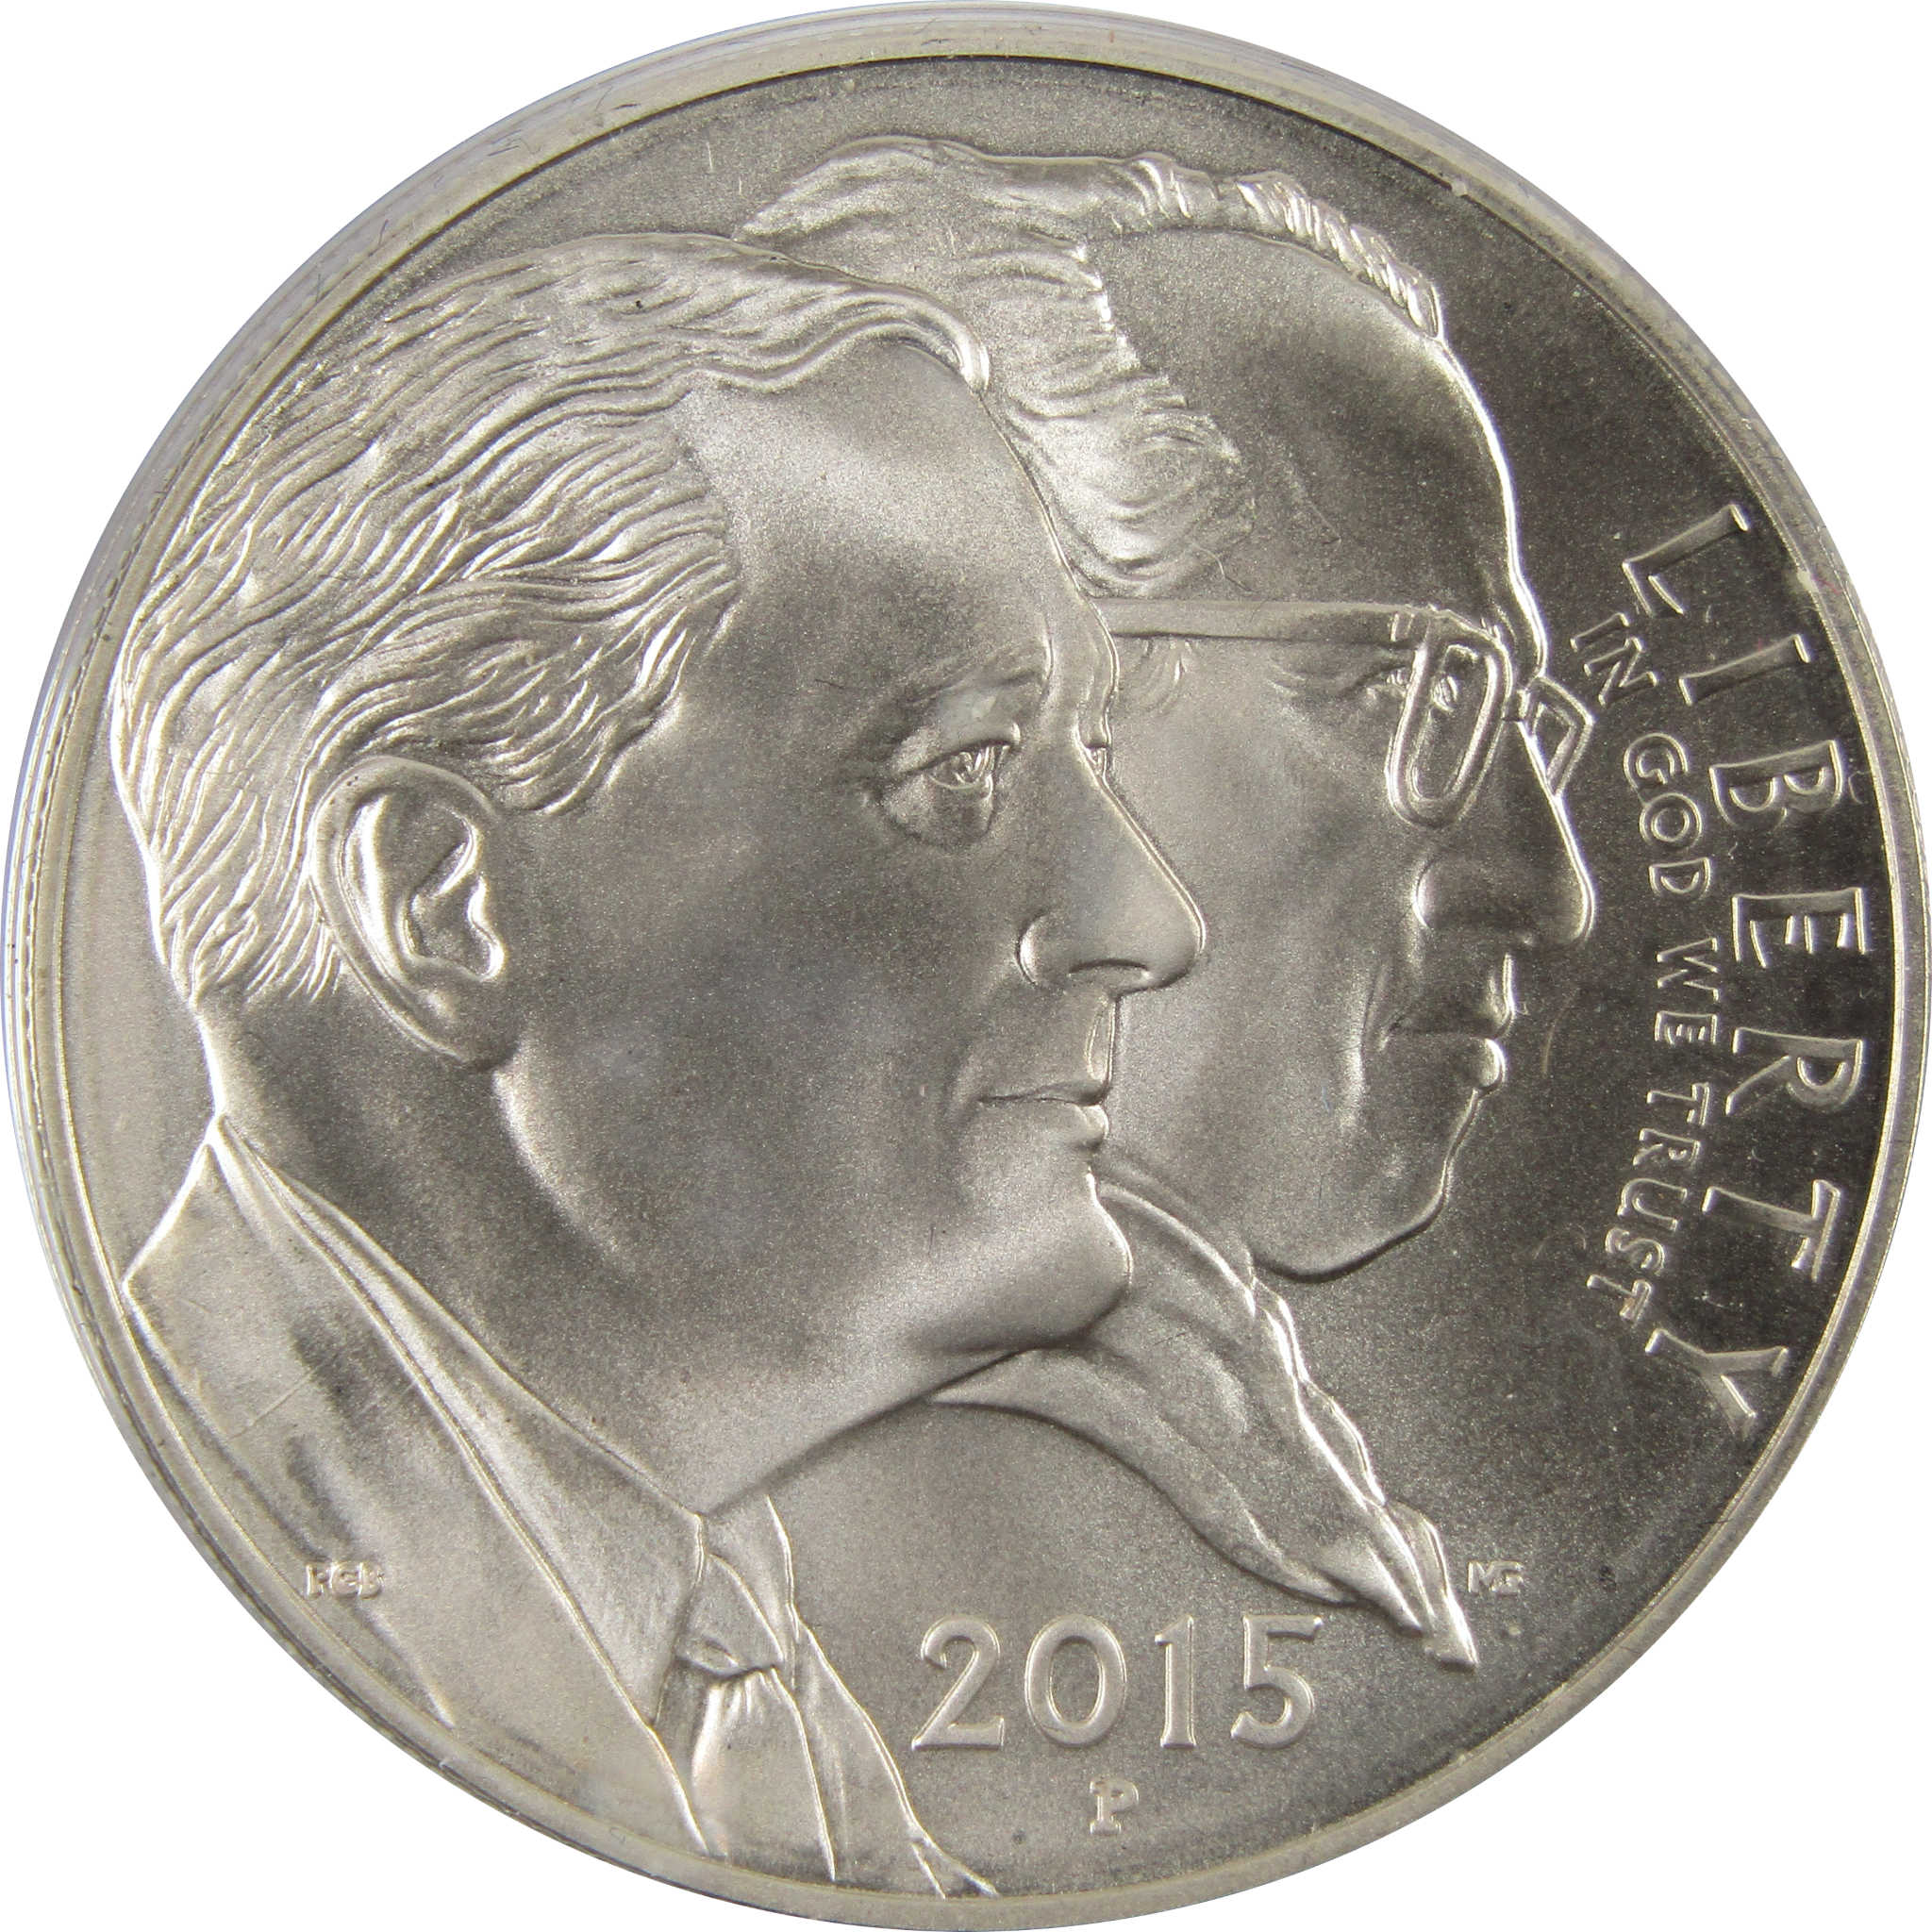 March of Dimes Dollar 2015 P Uncirculated Silver $1 Coin SKU:CPC2924